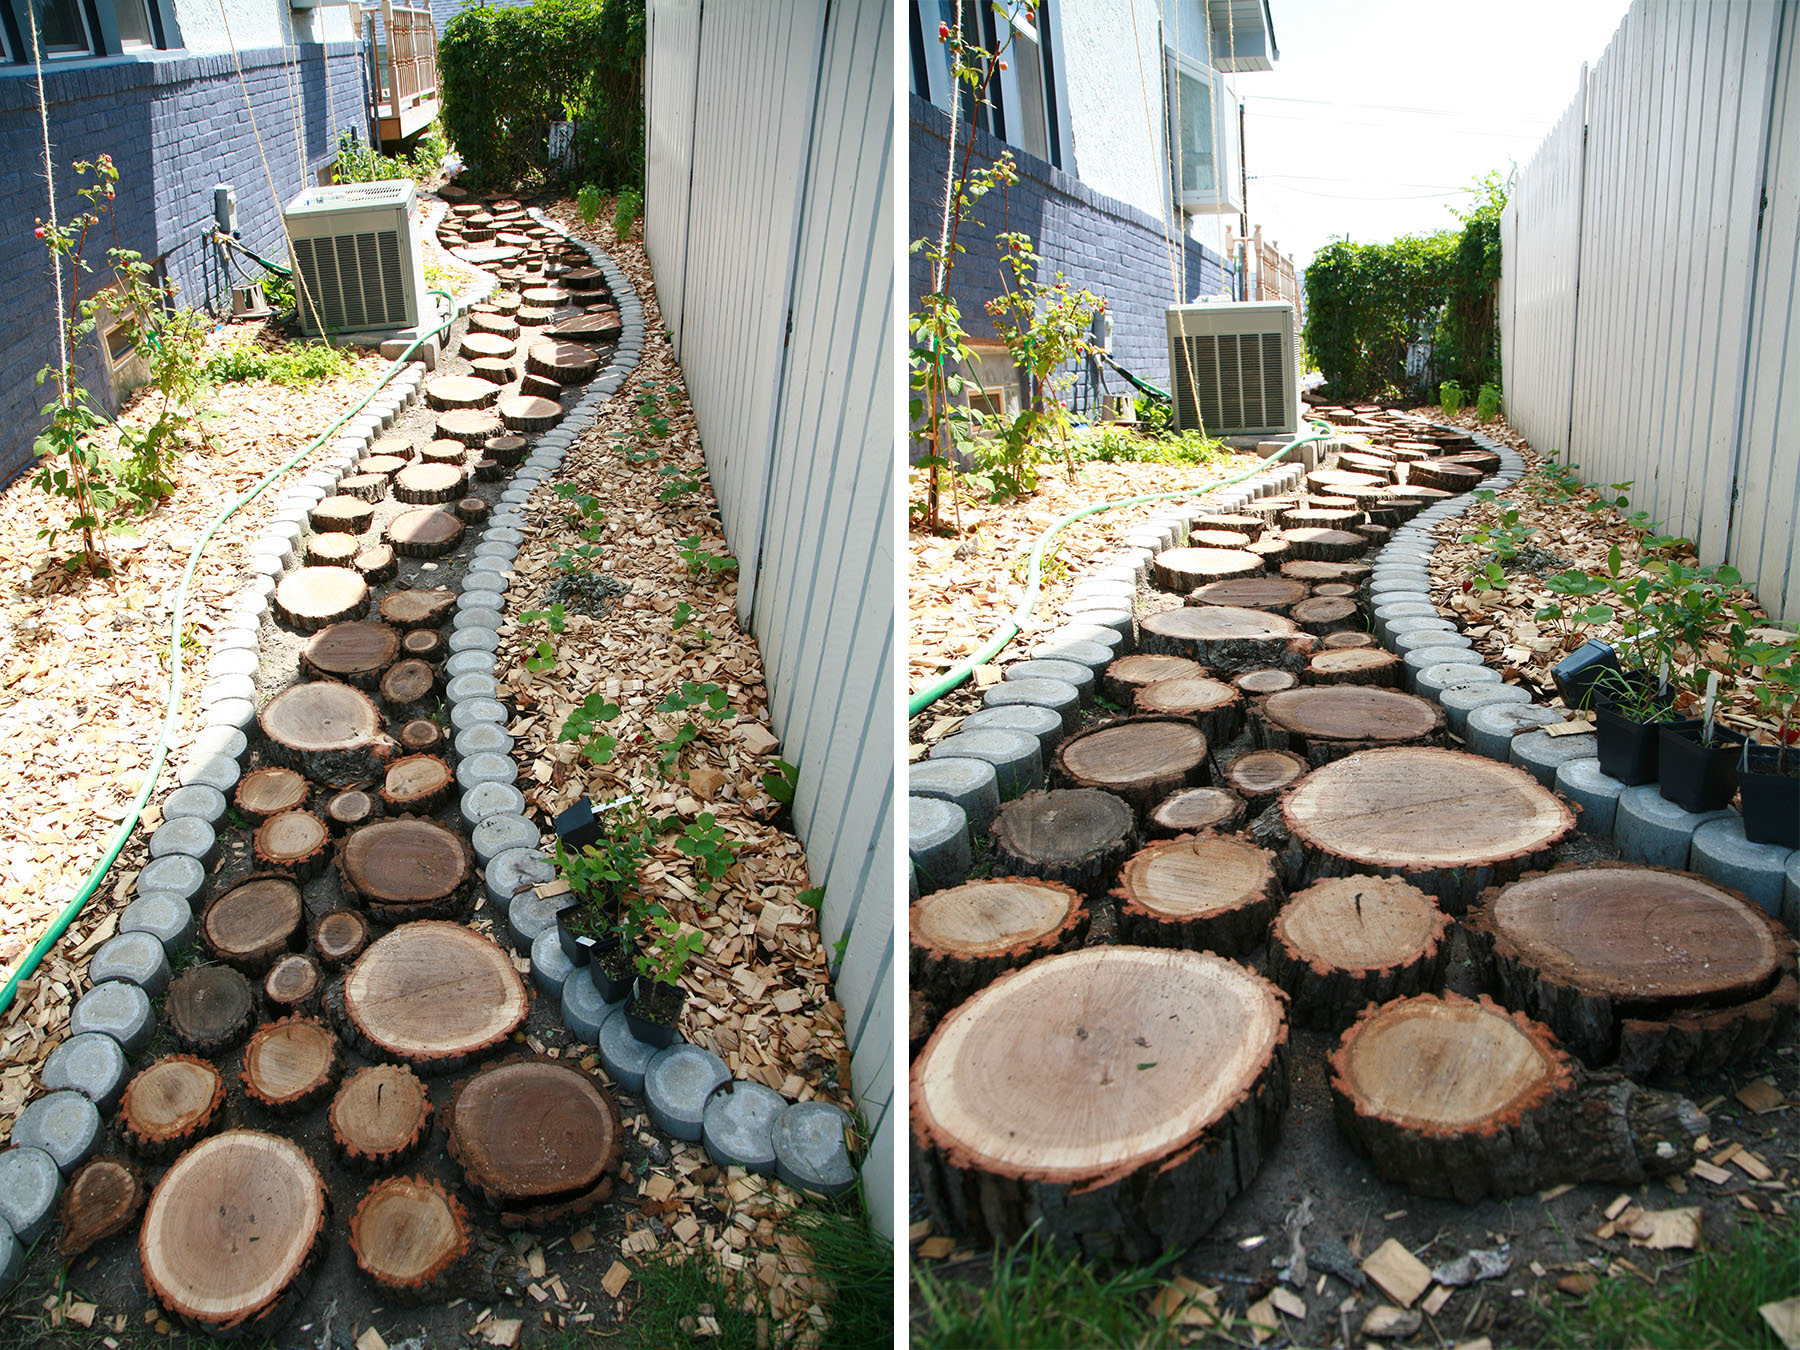 Slices of black walnut are placed along the dirt path.